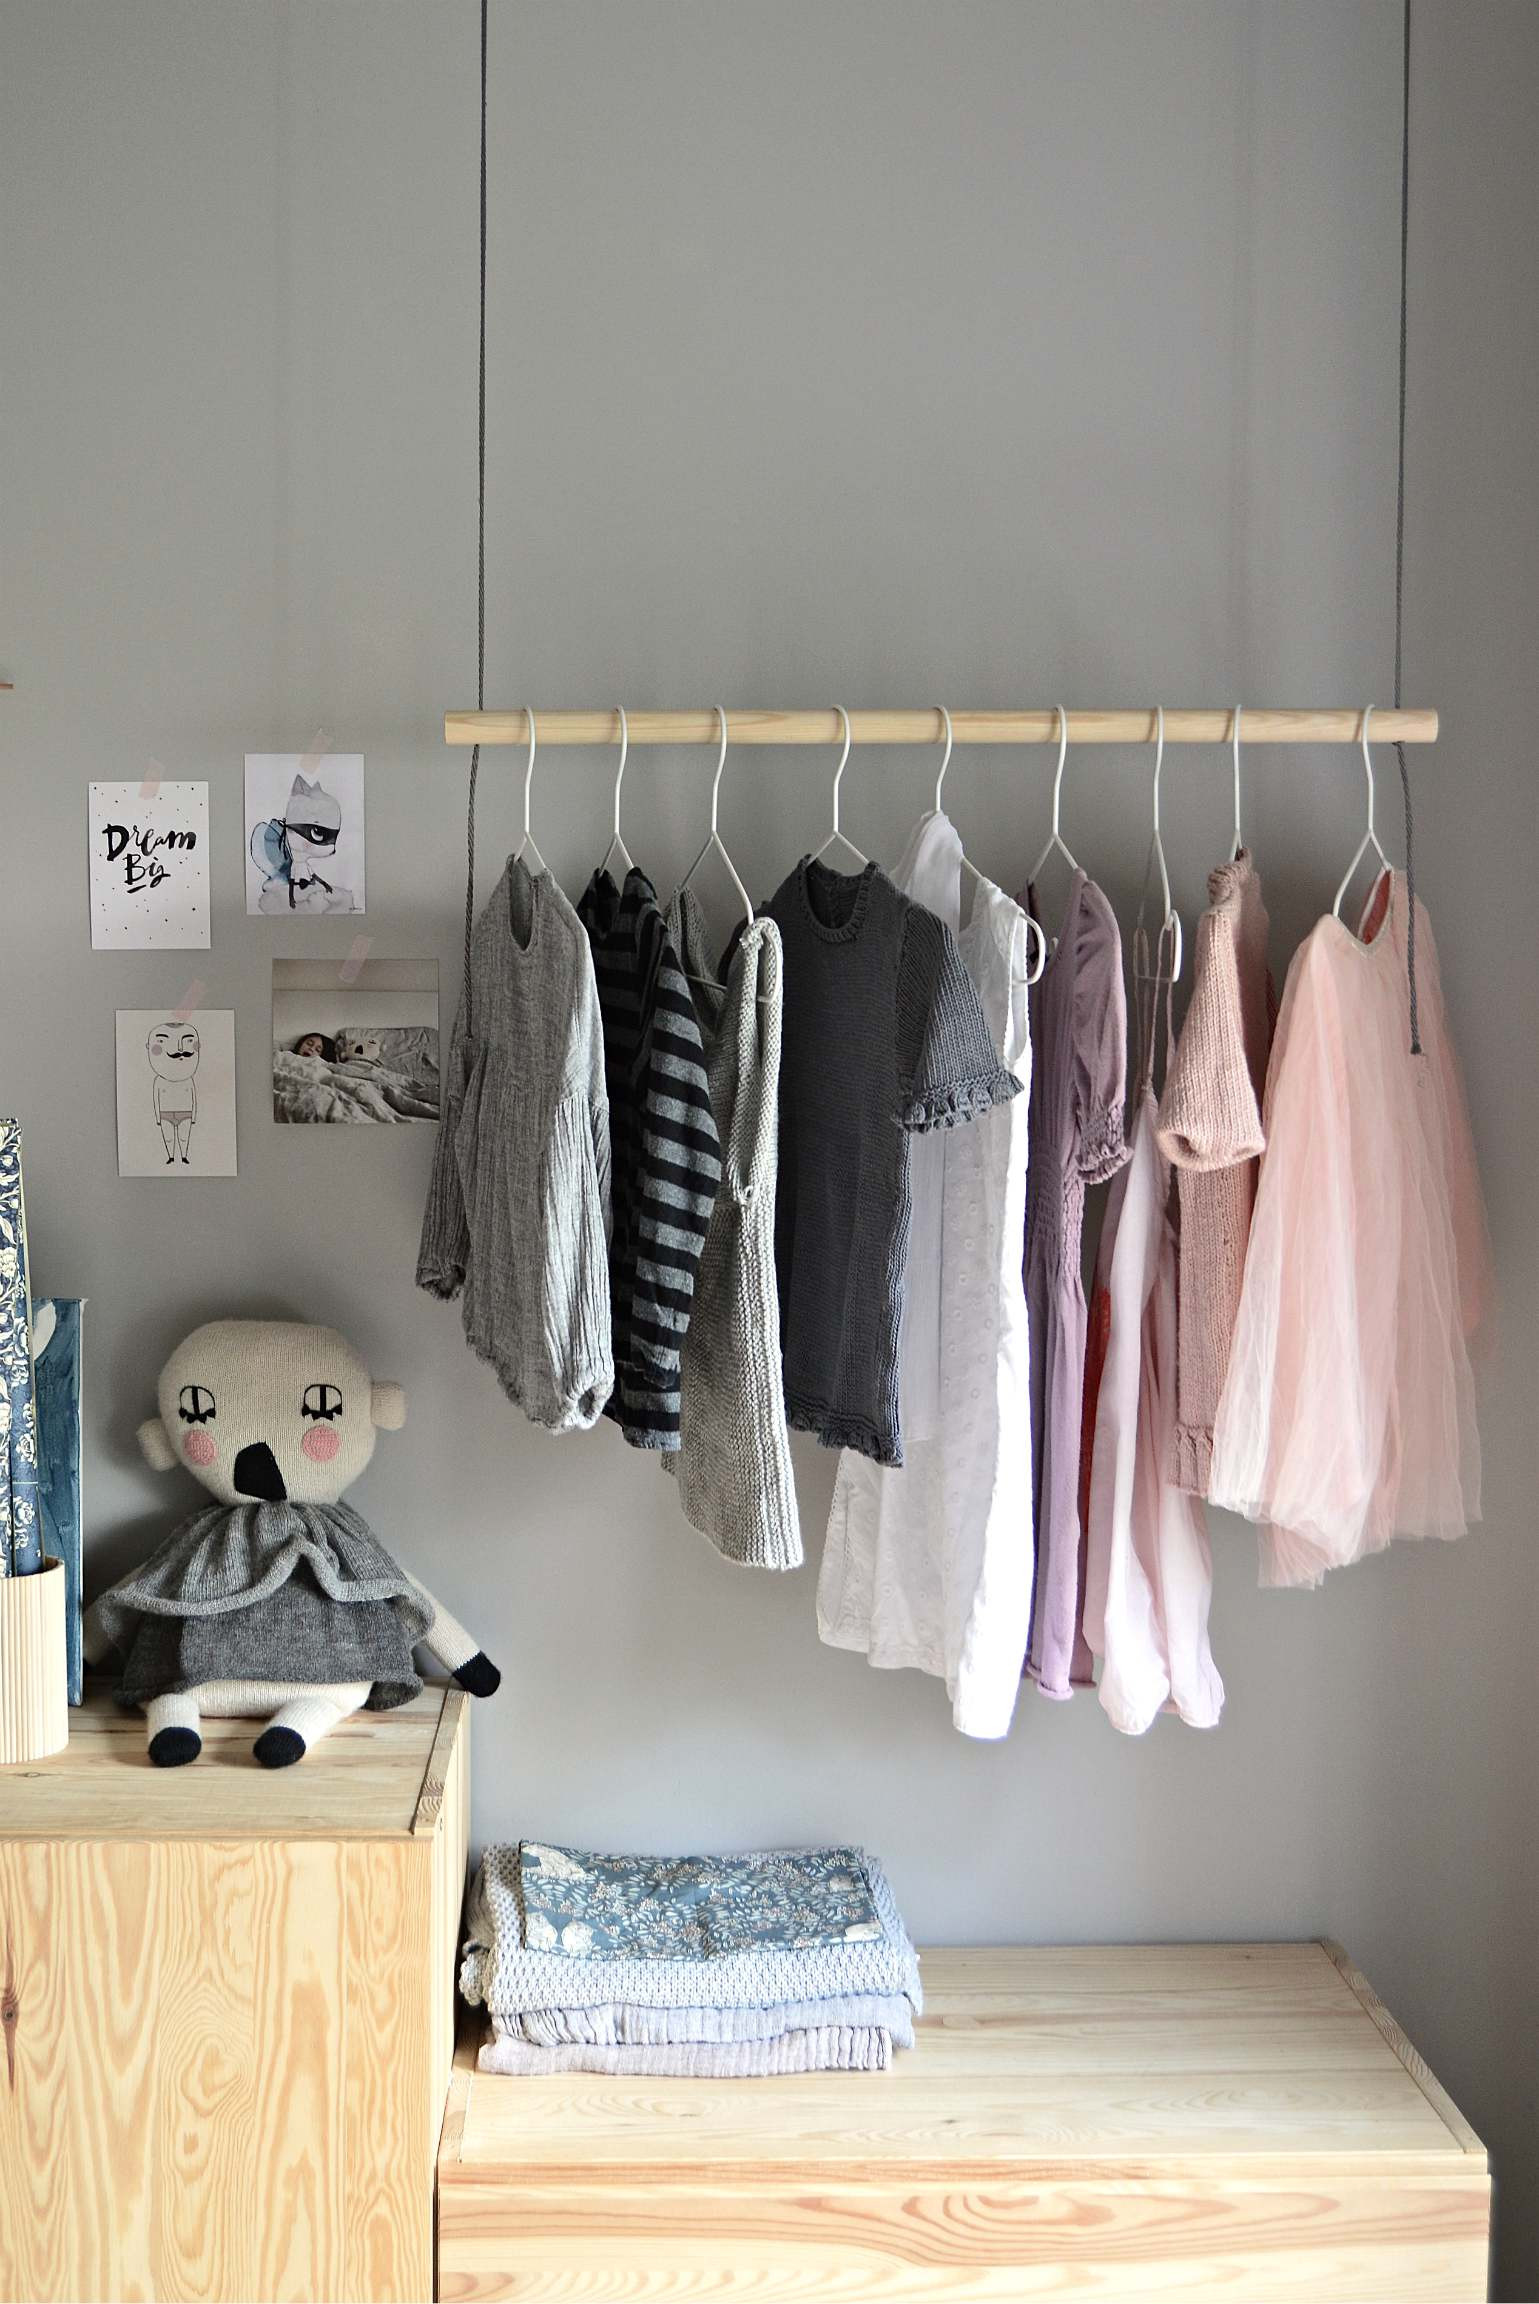 DIY Hanging Rack
 Hang on With this DIY hanging clothes rack DIY home